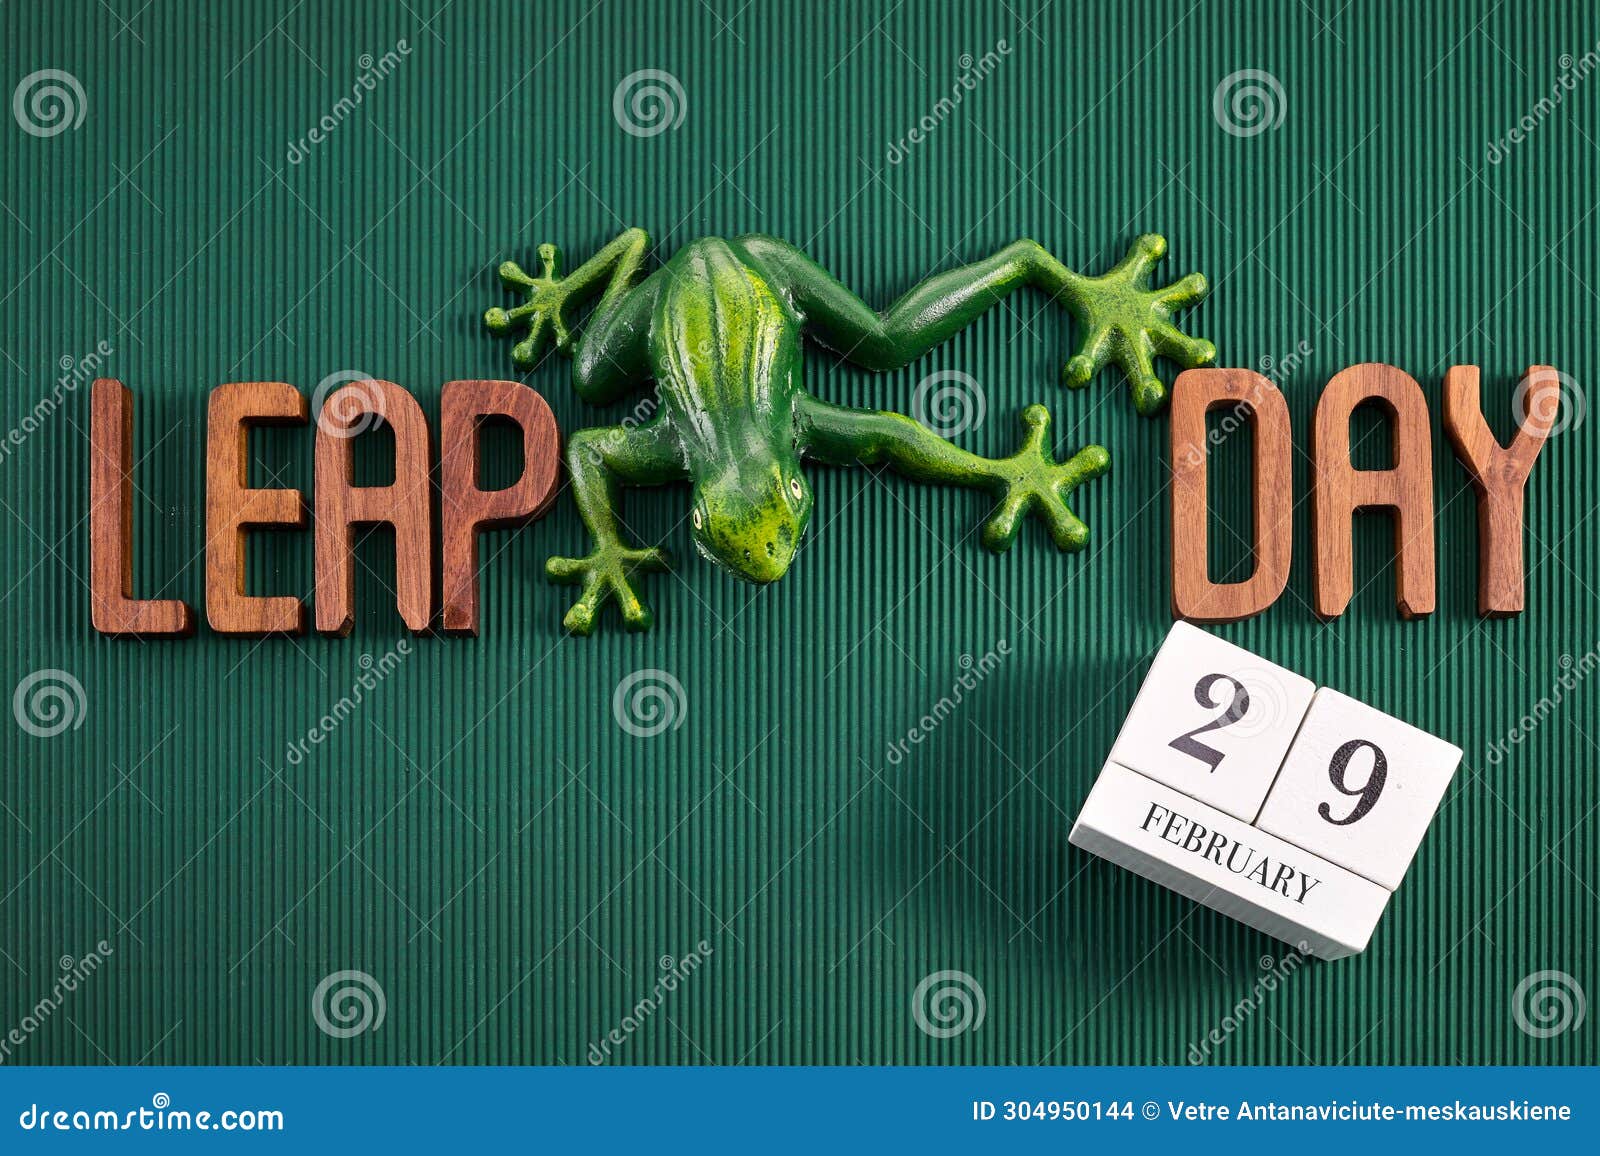 happy leap day on 29 february with jumping frog